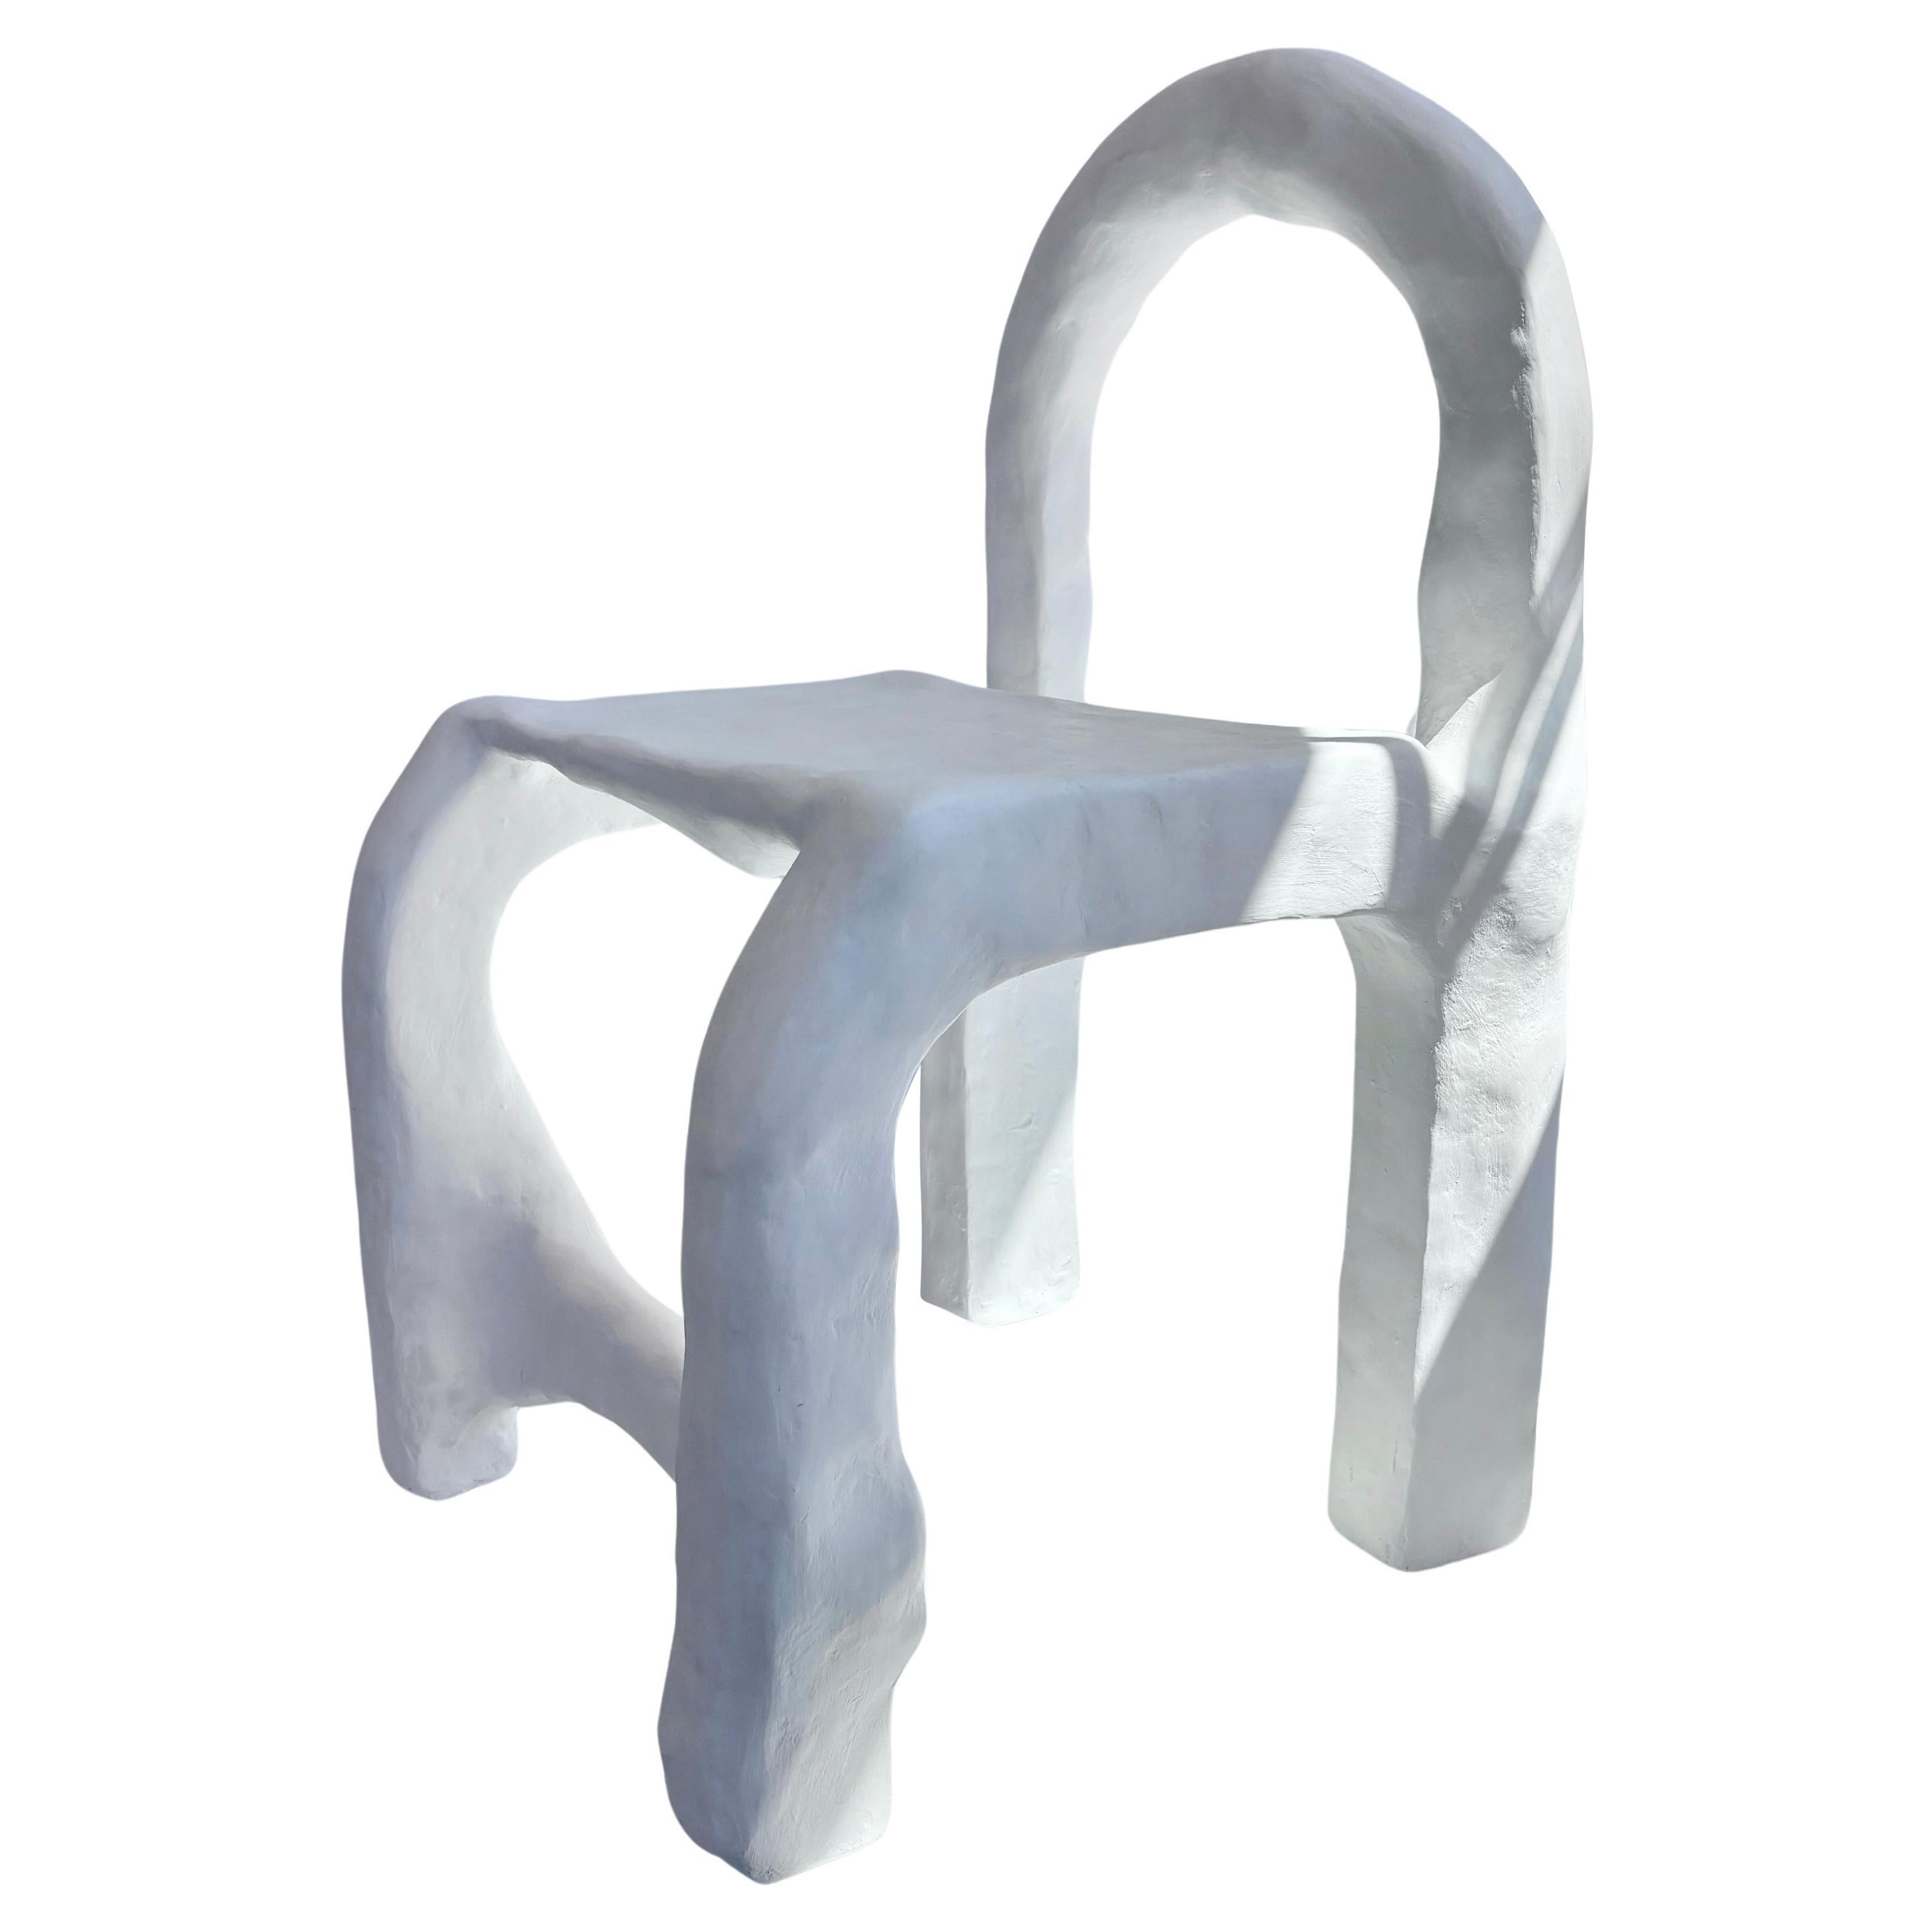 Biomorphic Line by Studio Chora, Functional Sculpture, White Plaster Chair For Sale